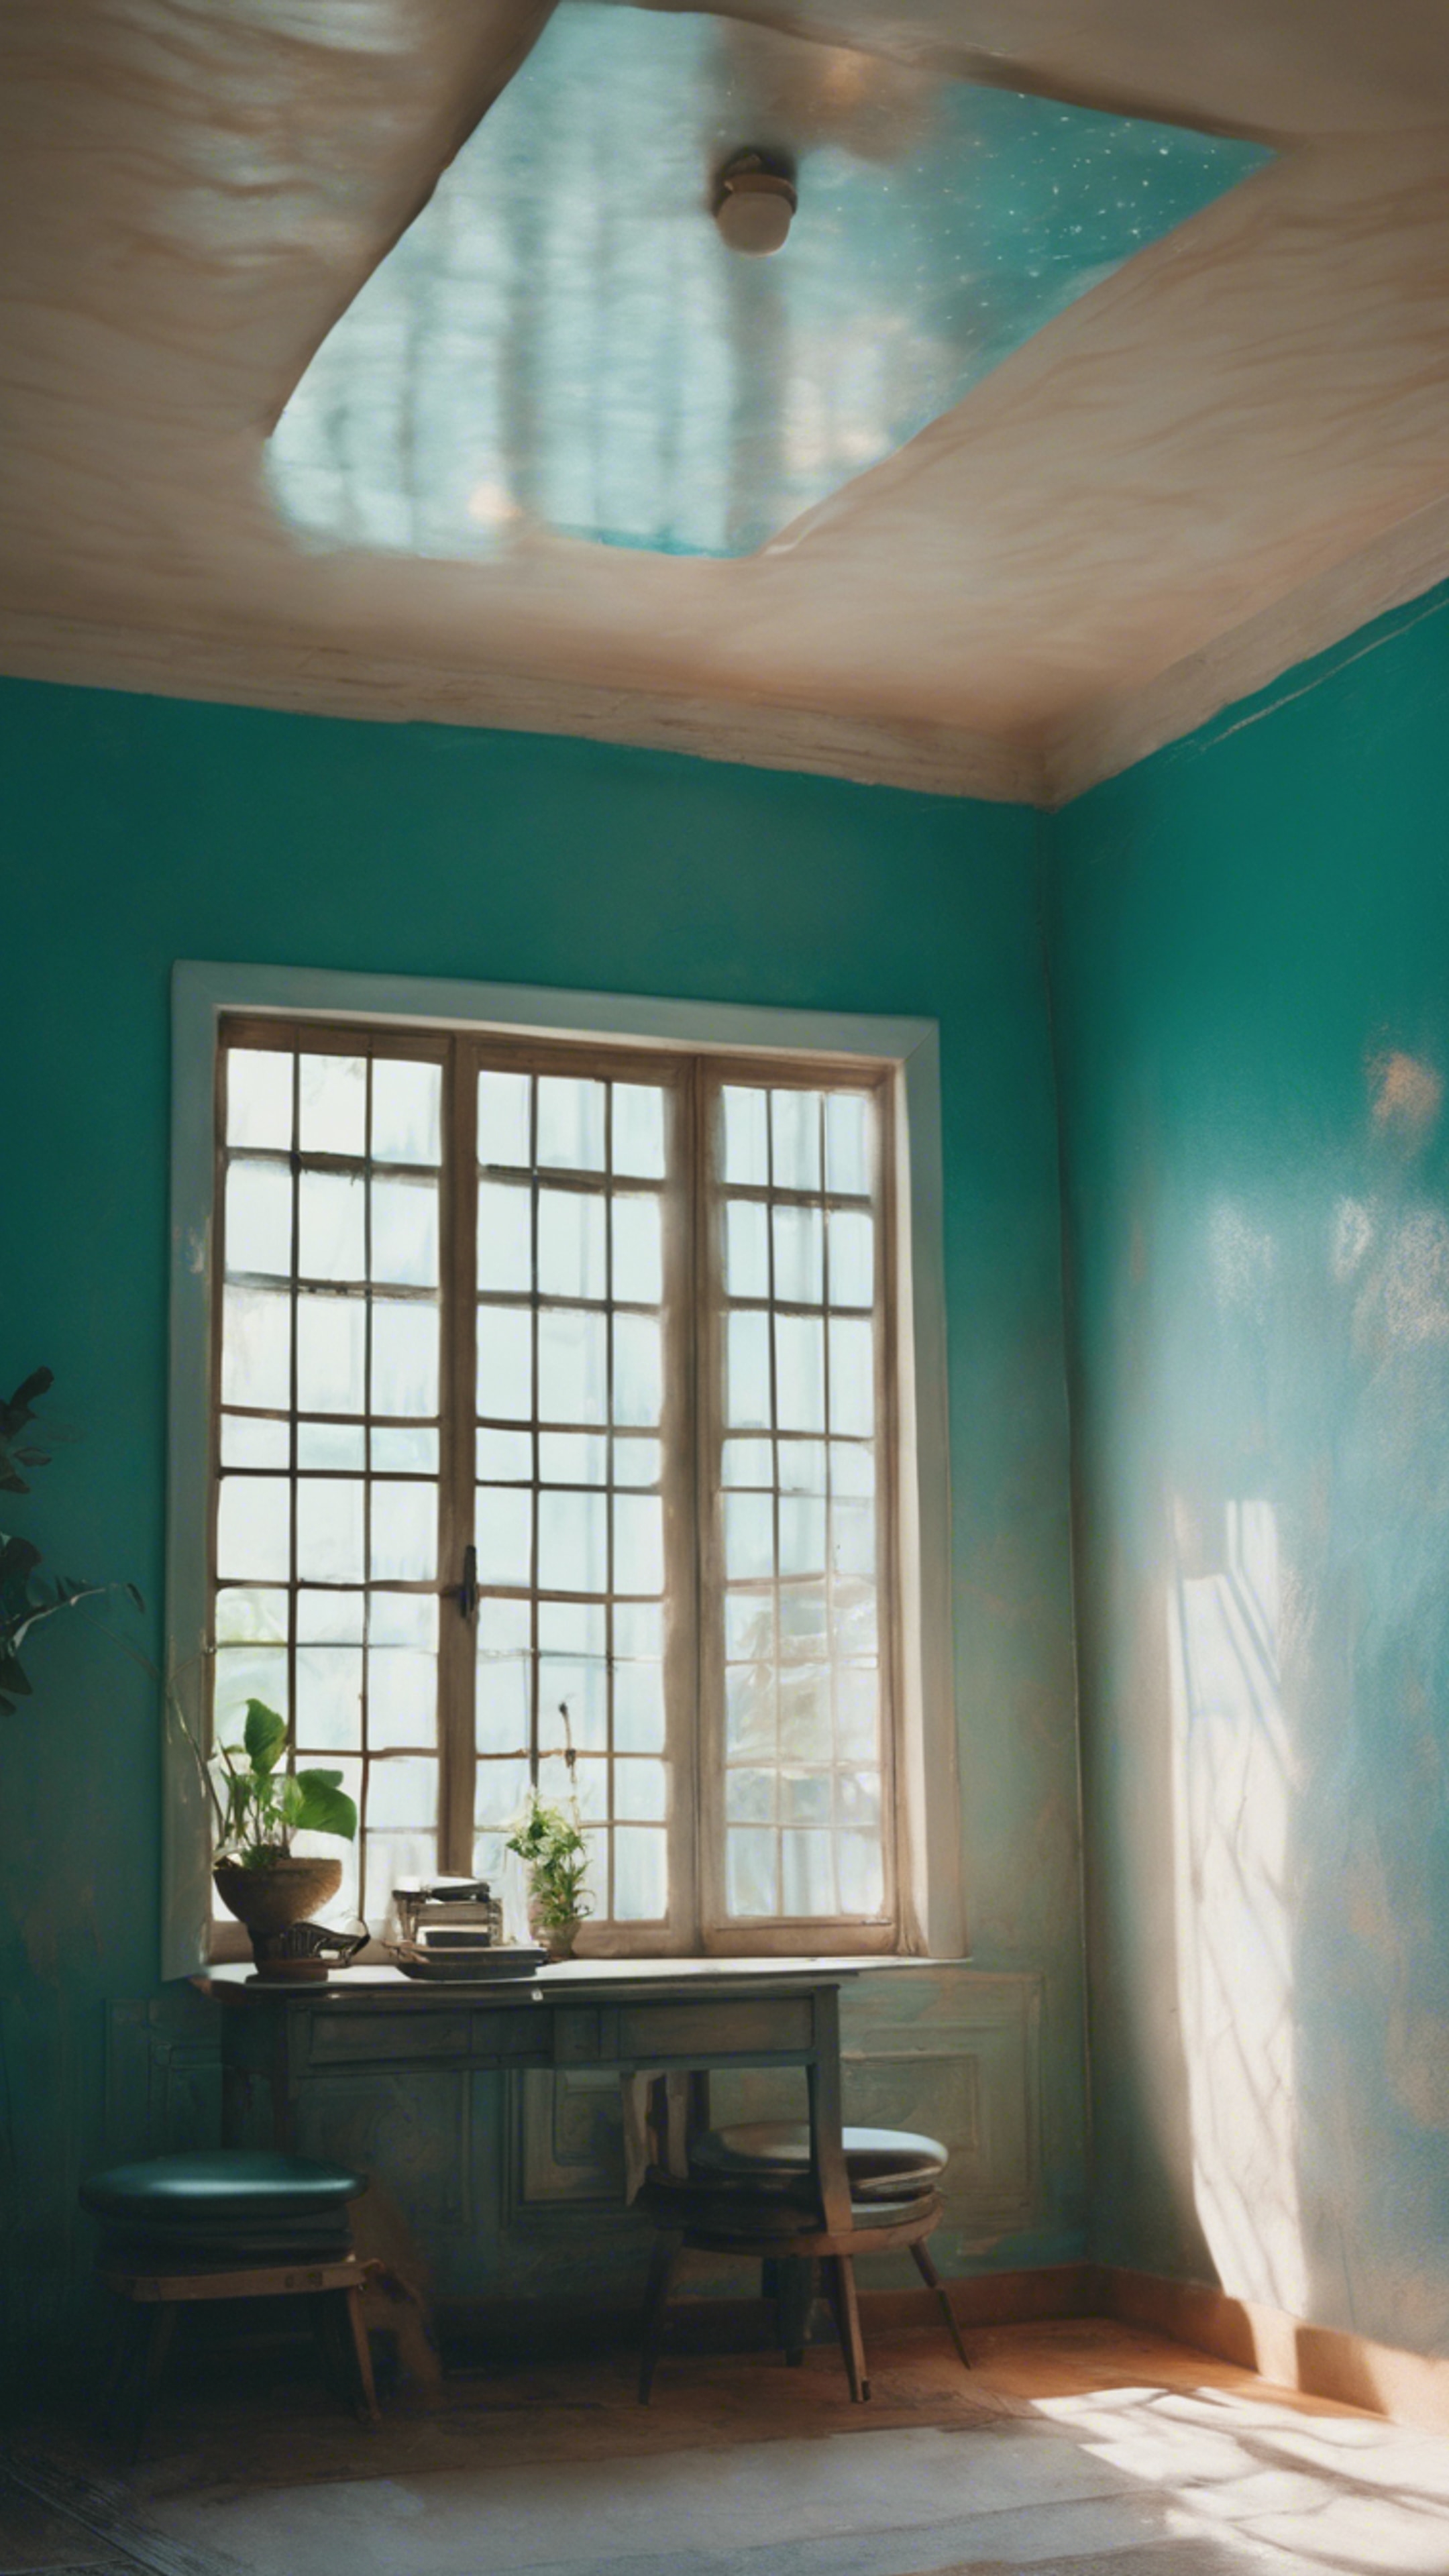 A serene room painted in the shade of cool teal.壁紙[59a2d2889aea4415a863]